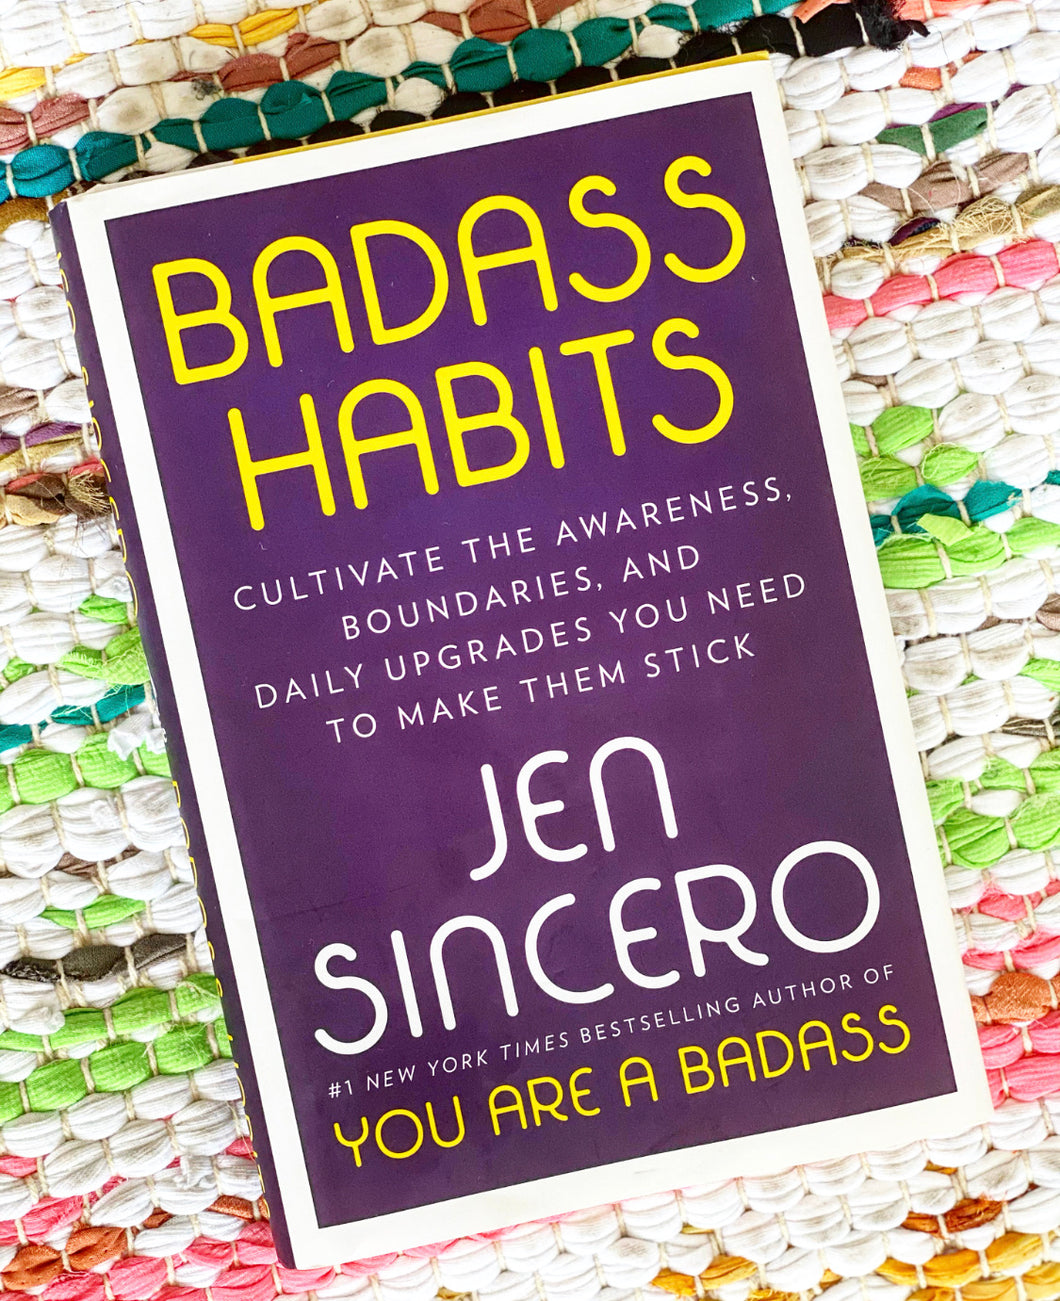 Badass Habits: Cultivate the Awareness, Boundaries, and Daily Upgrades You Need to Make Them Stick | Jen Sincero